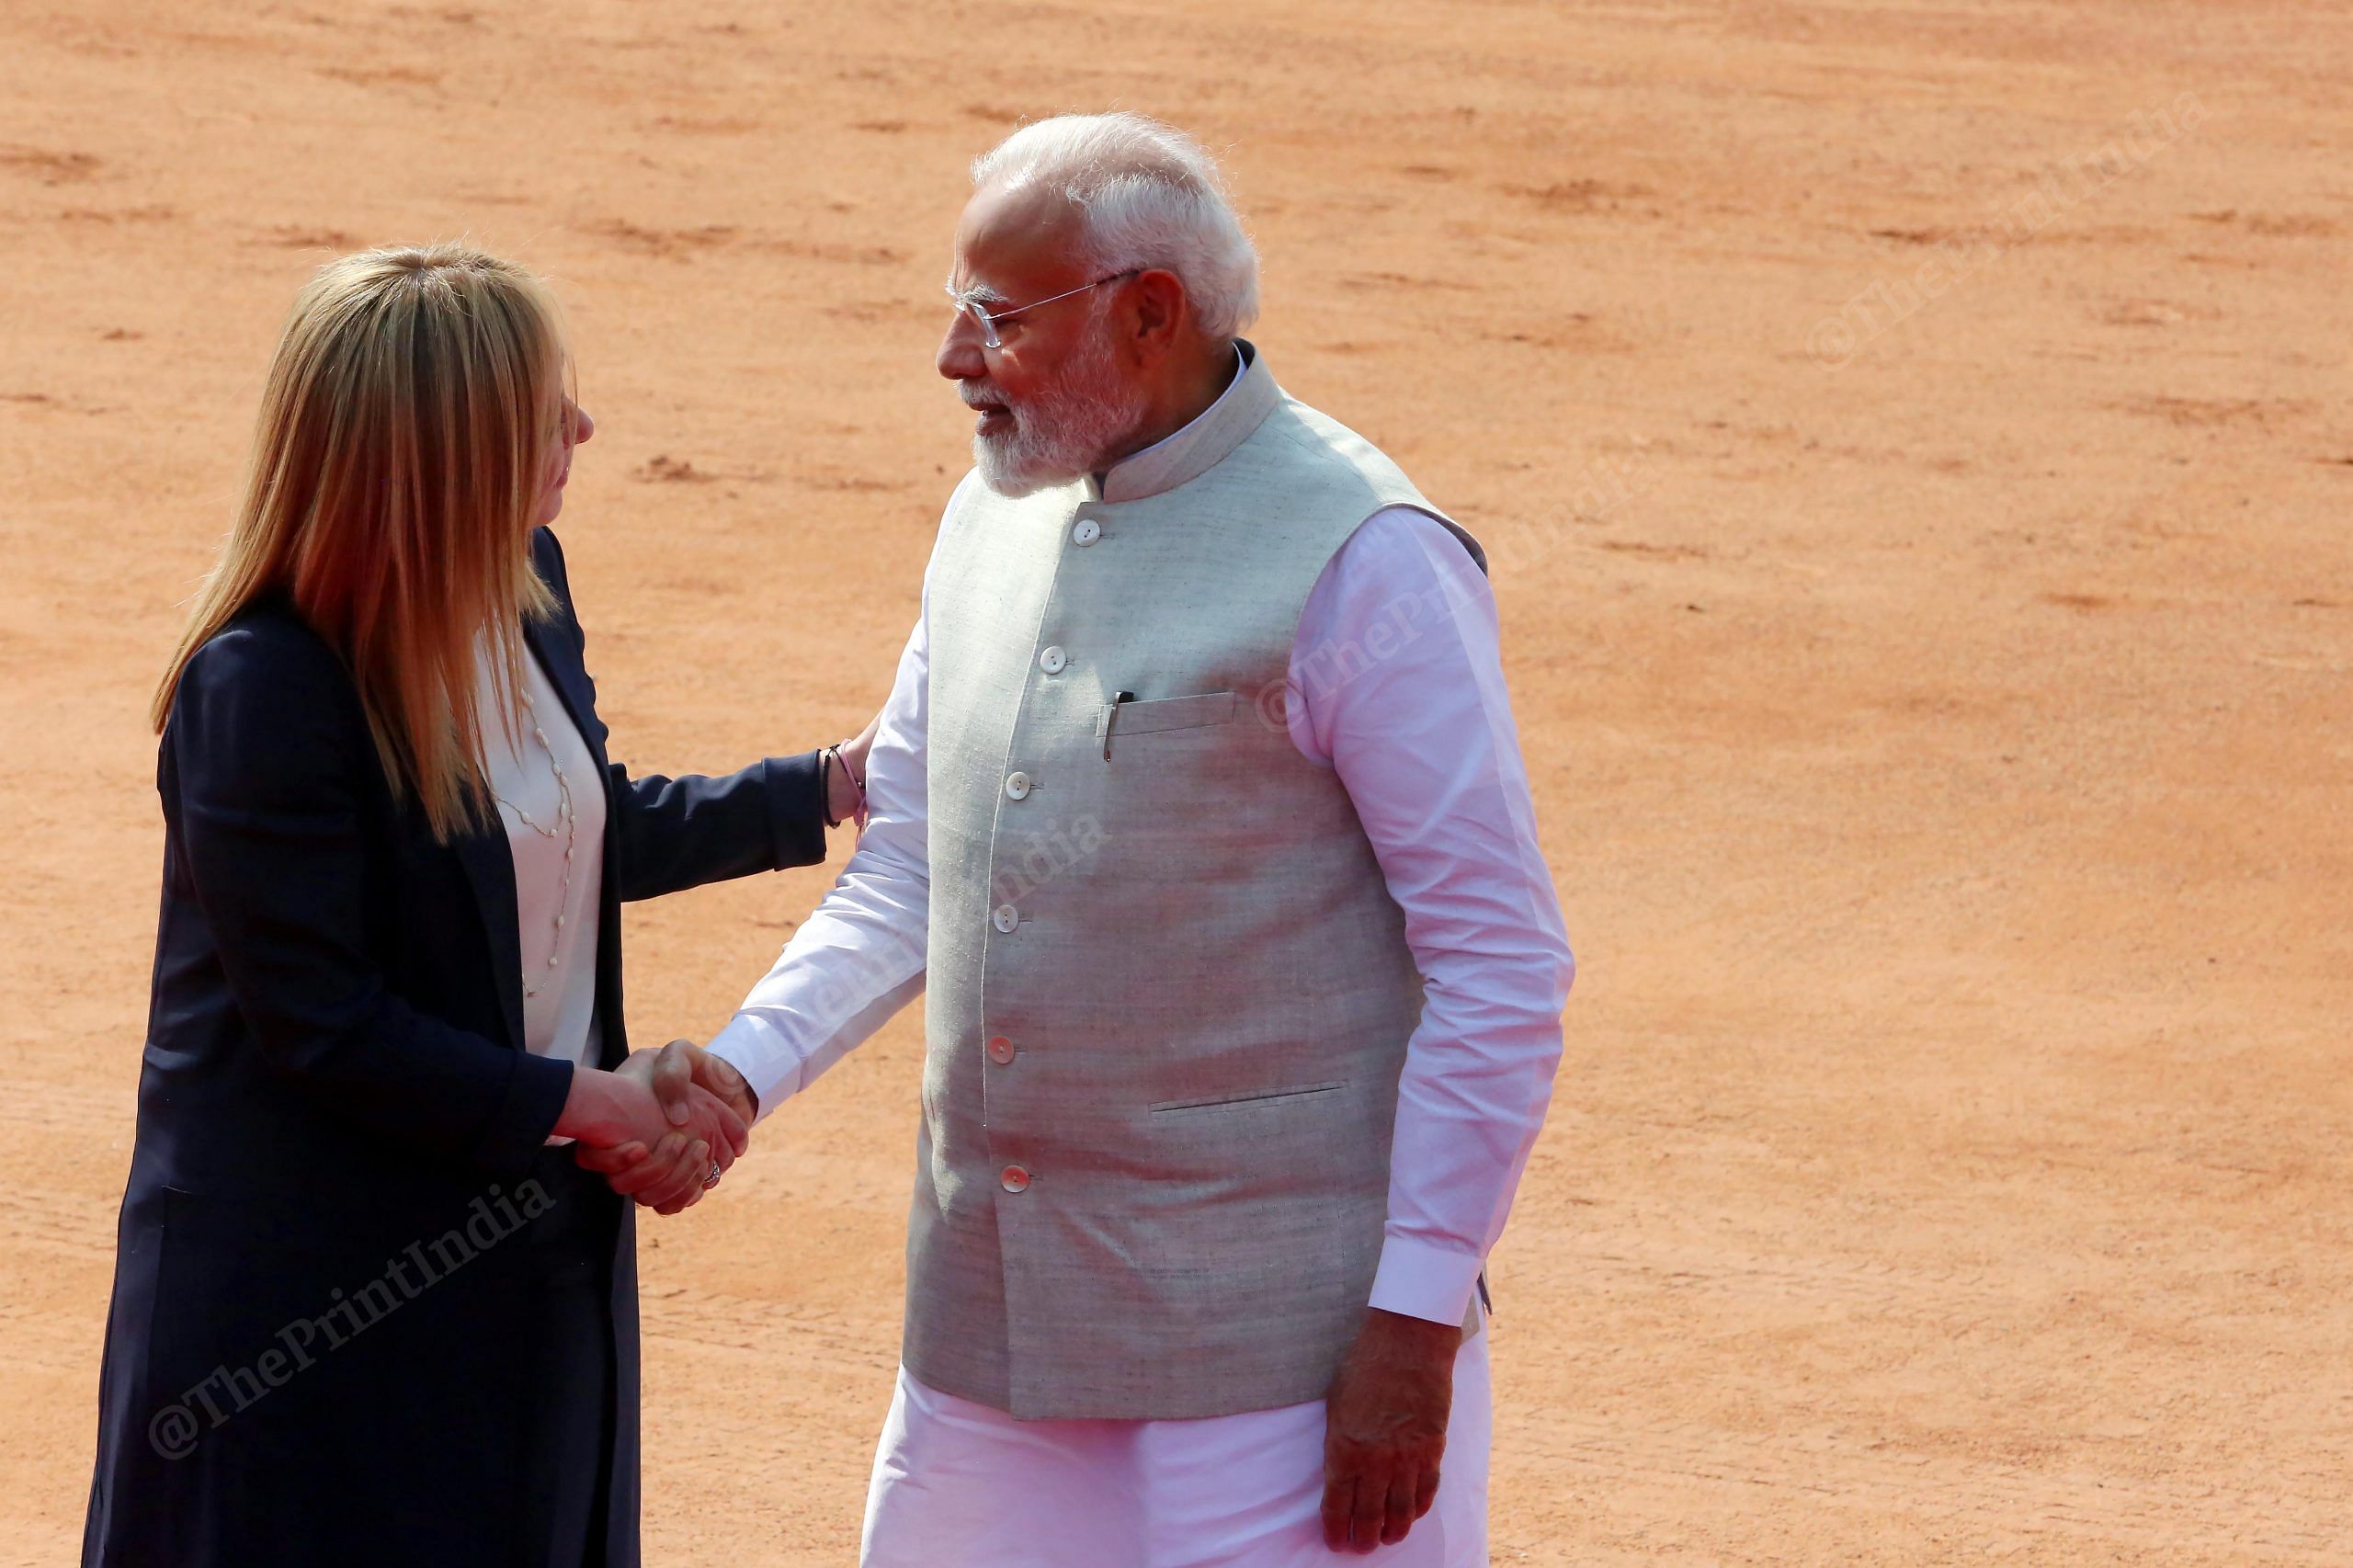 India Italy75 — Italian Pm Meloni Meets Modi And Ministers On India Visit